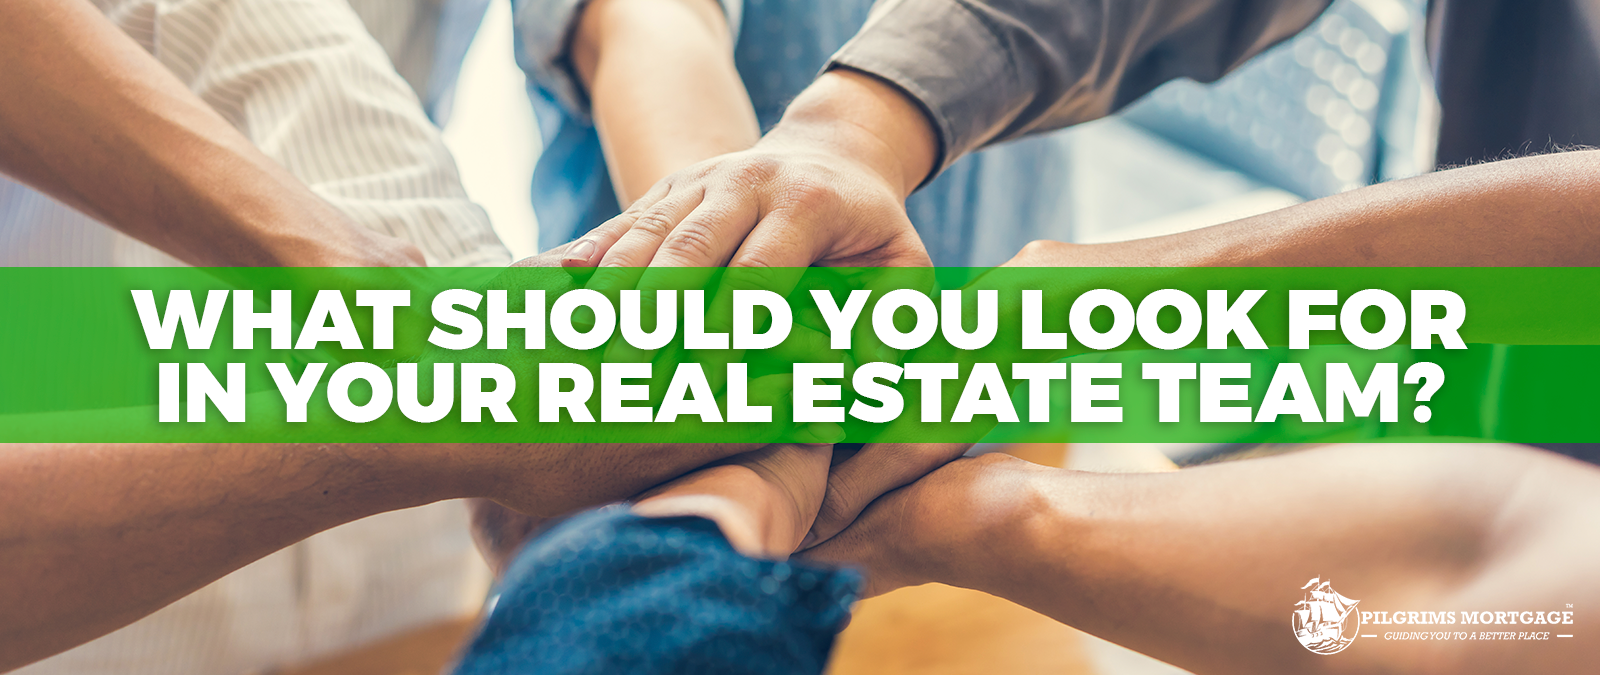 What Should You Look For In Your Real Estate Team?